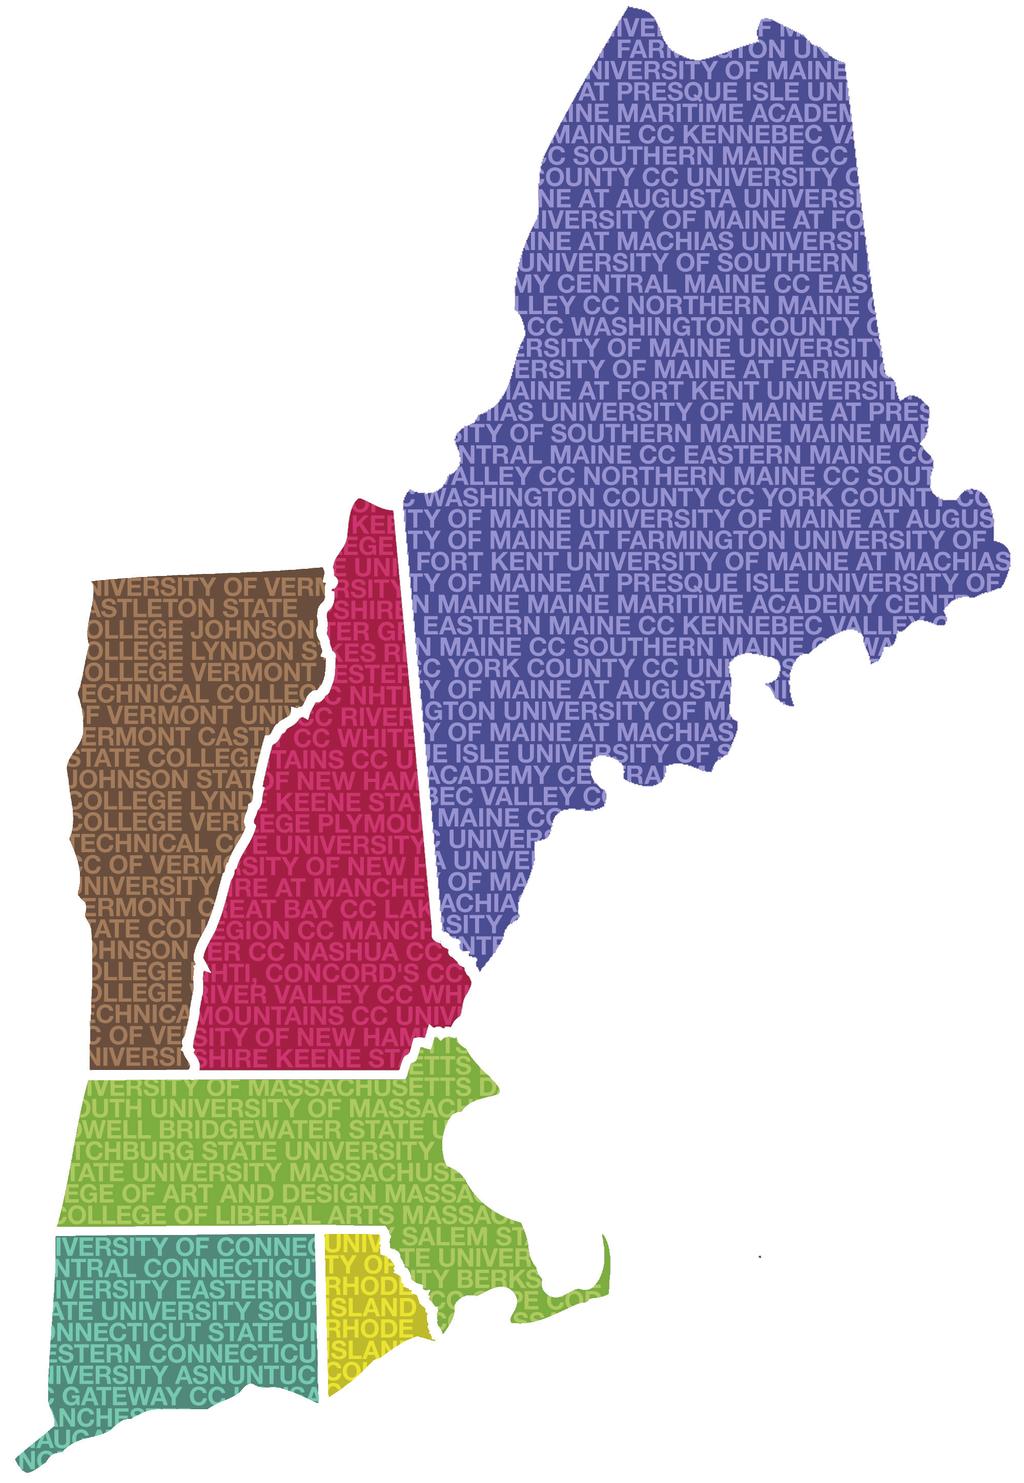 new england board of higher education s for new england residents Annual report on the benefit of the Regional Student Program (RSP) to the participating residents and state